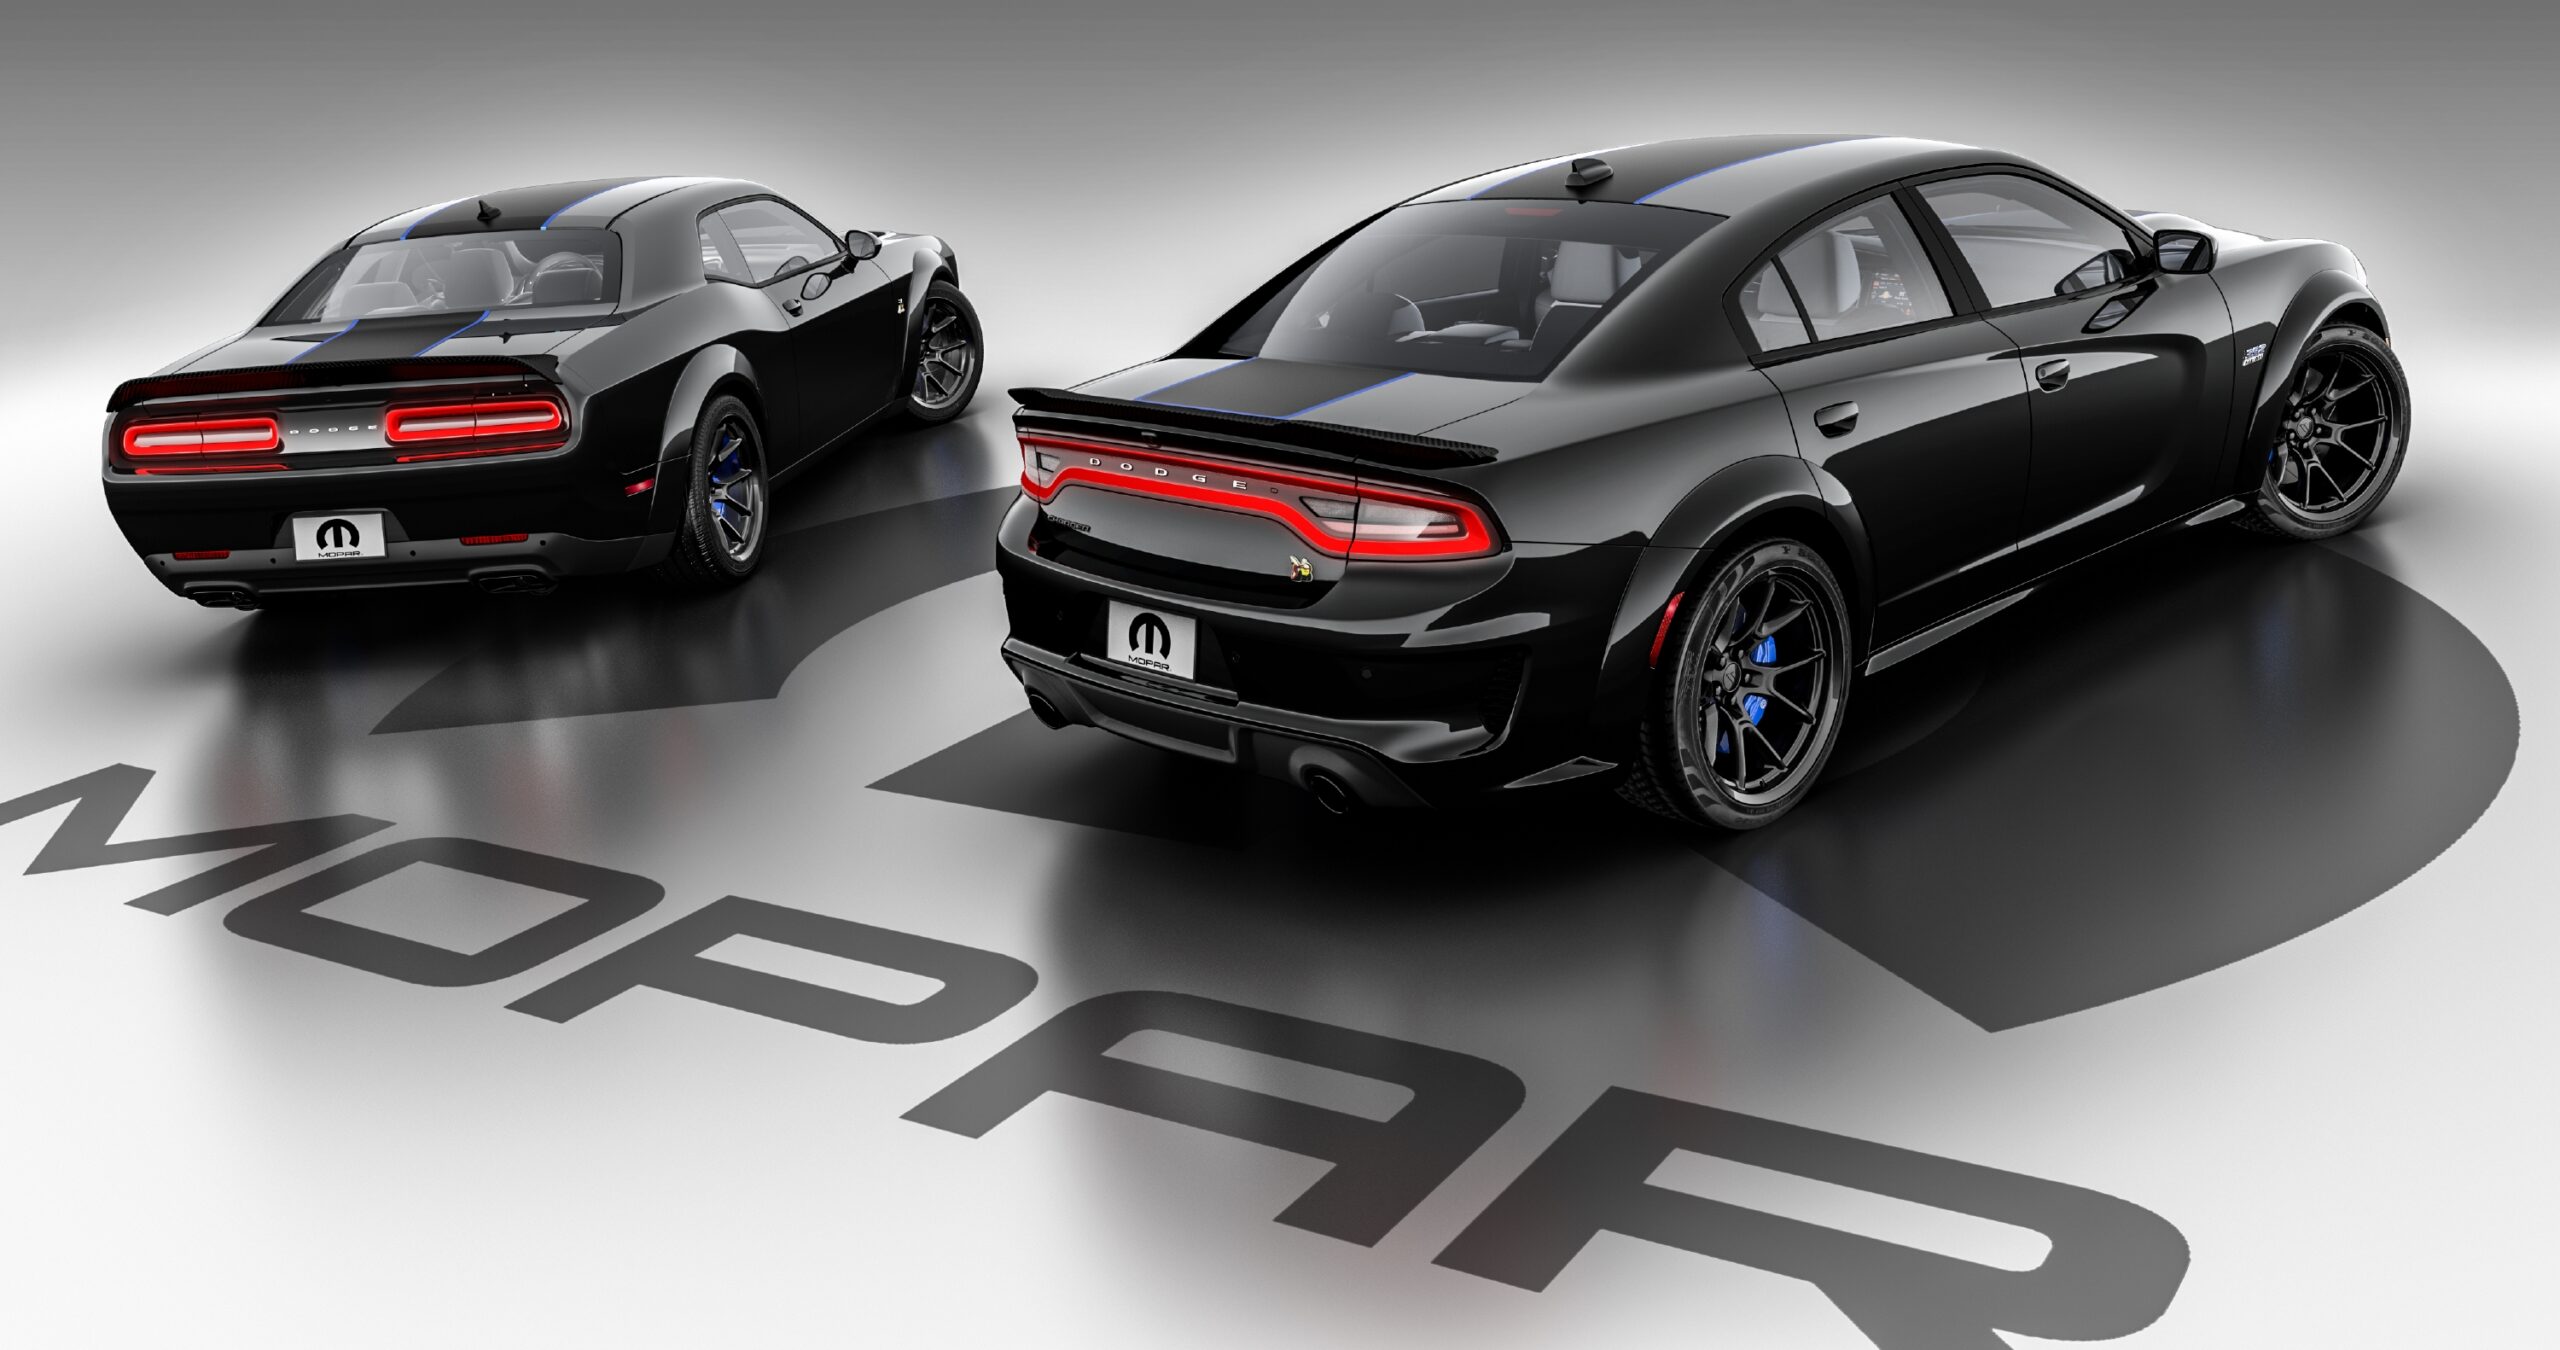 Mopar continues its long-standing, factory-vehicle customization program with the introduction of the Mopar ‘23 Dodge Challenger and Dodge Charger special-edition models.  Superior craftsmanship from the Mopar Custom Shop adds exclusive exterior and interior details to 2023 Dodge Challenger and Charger R/T Scat Pack Widebody models.